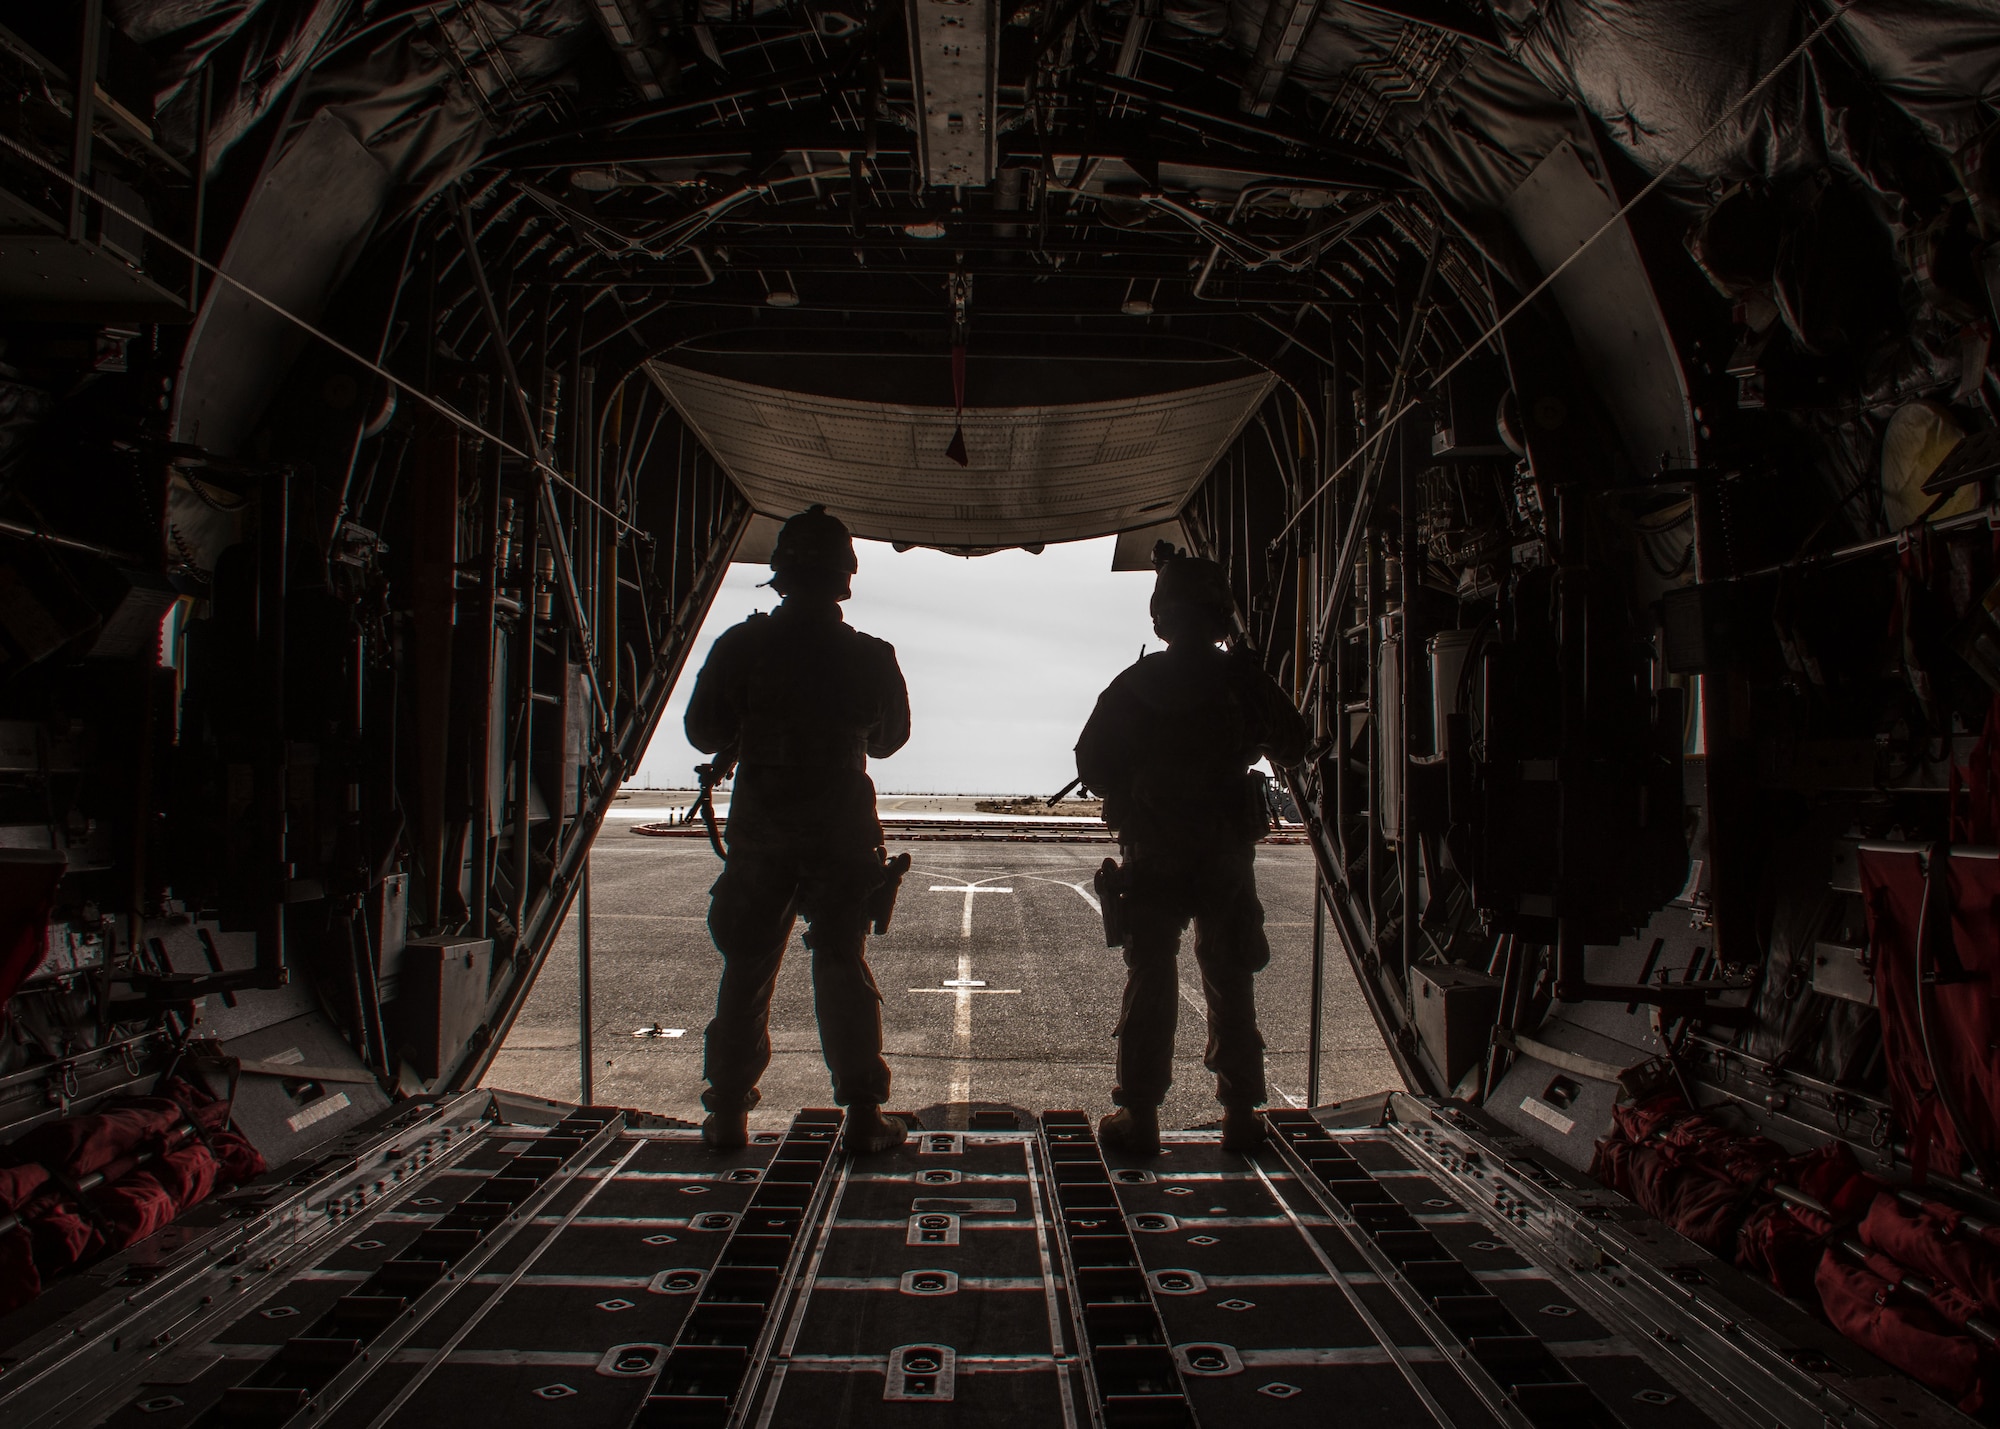 Staff Sgt. Ryan Malicki, left, and Senior Airman Ryan Donato, right, 386th Expeditionary Security Forces Squadron Fly-Away Security Team members, monitor the flightline during a FAST drill at an undisclosed location in Southwest Asia, Feb. 5, 2017. These teams are used when additional security is required at the aircraft’s destination. (U.S. Air Force photo/Senior Airman Andrew Park)